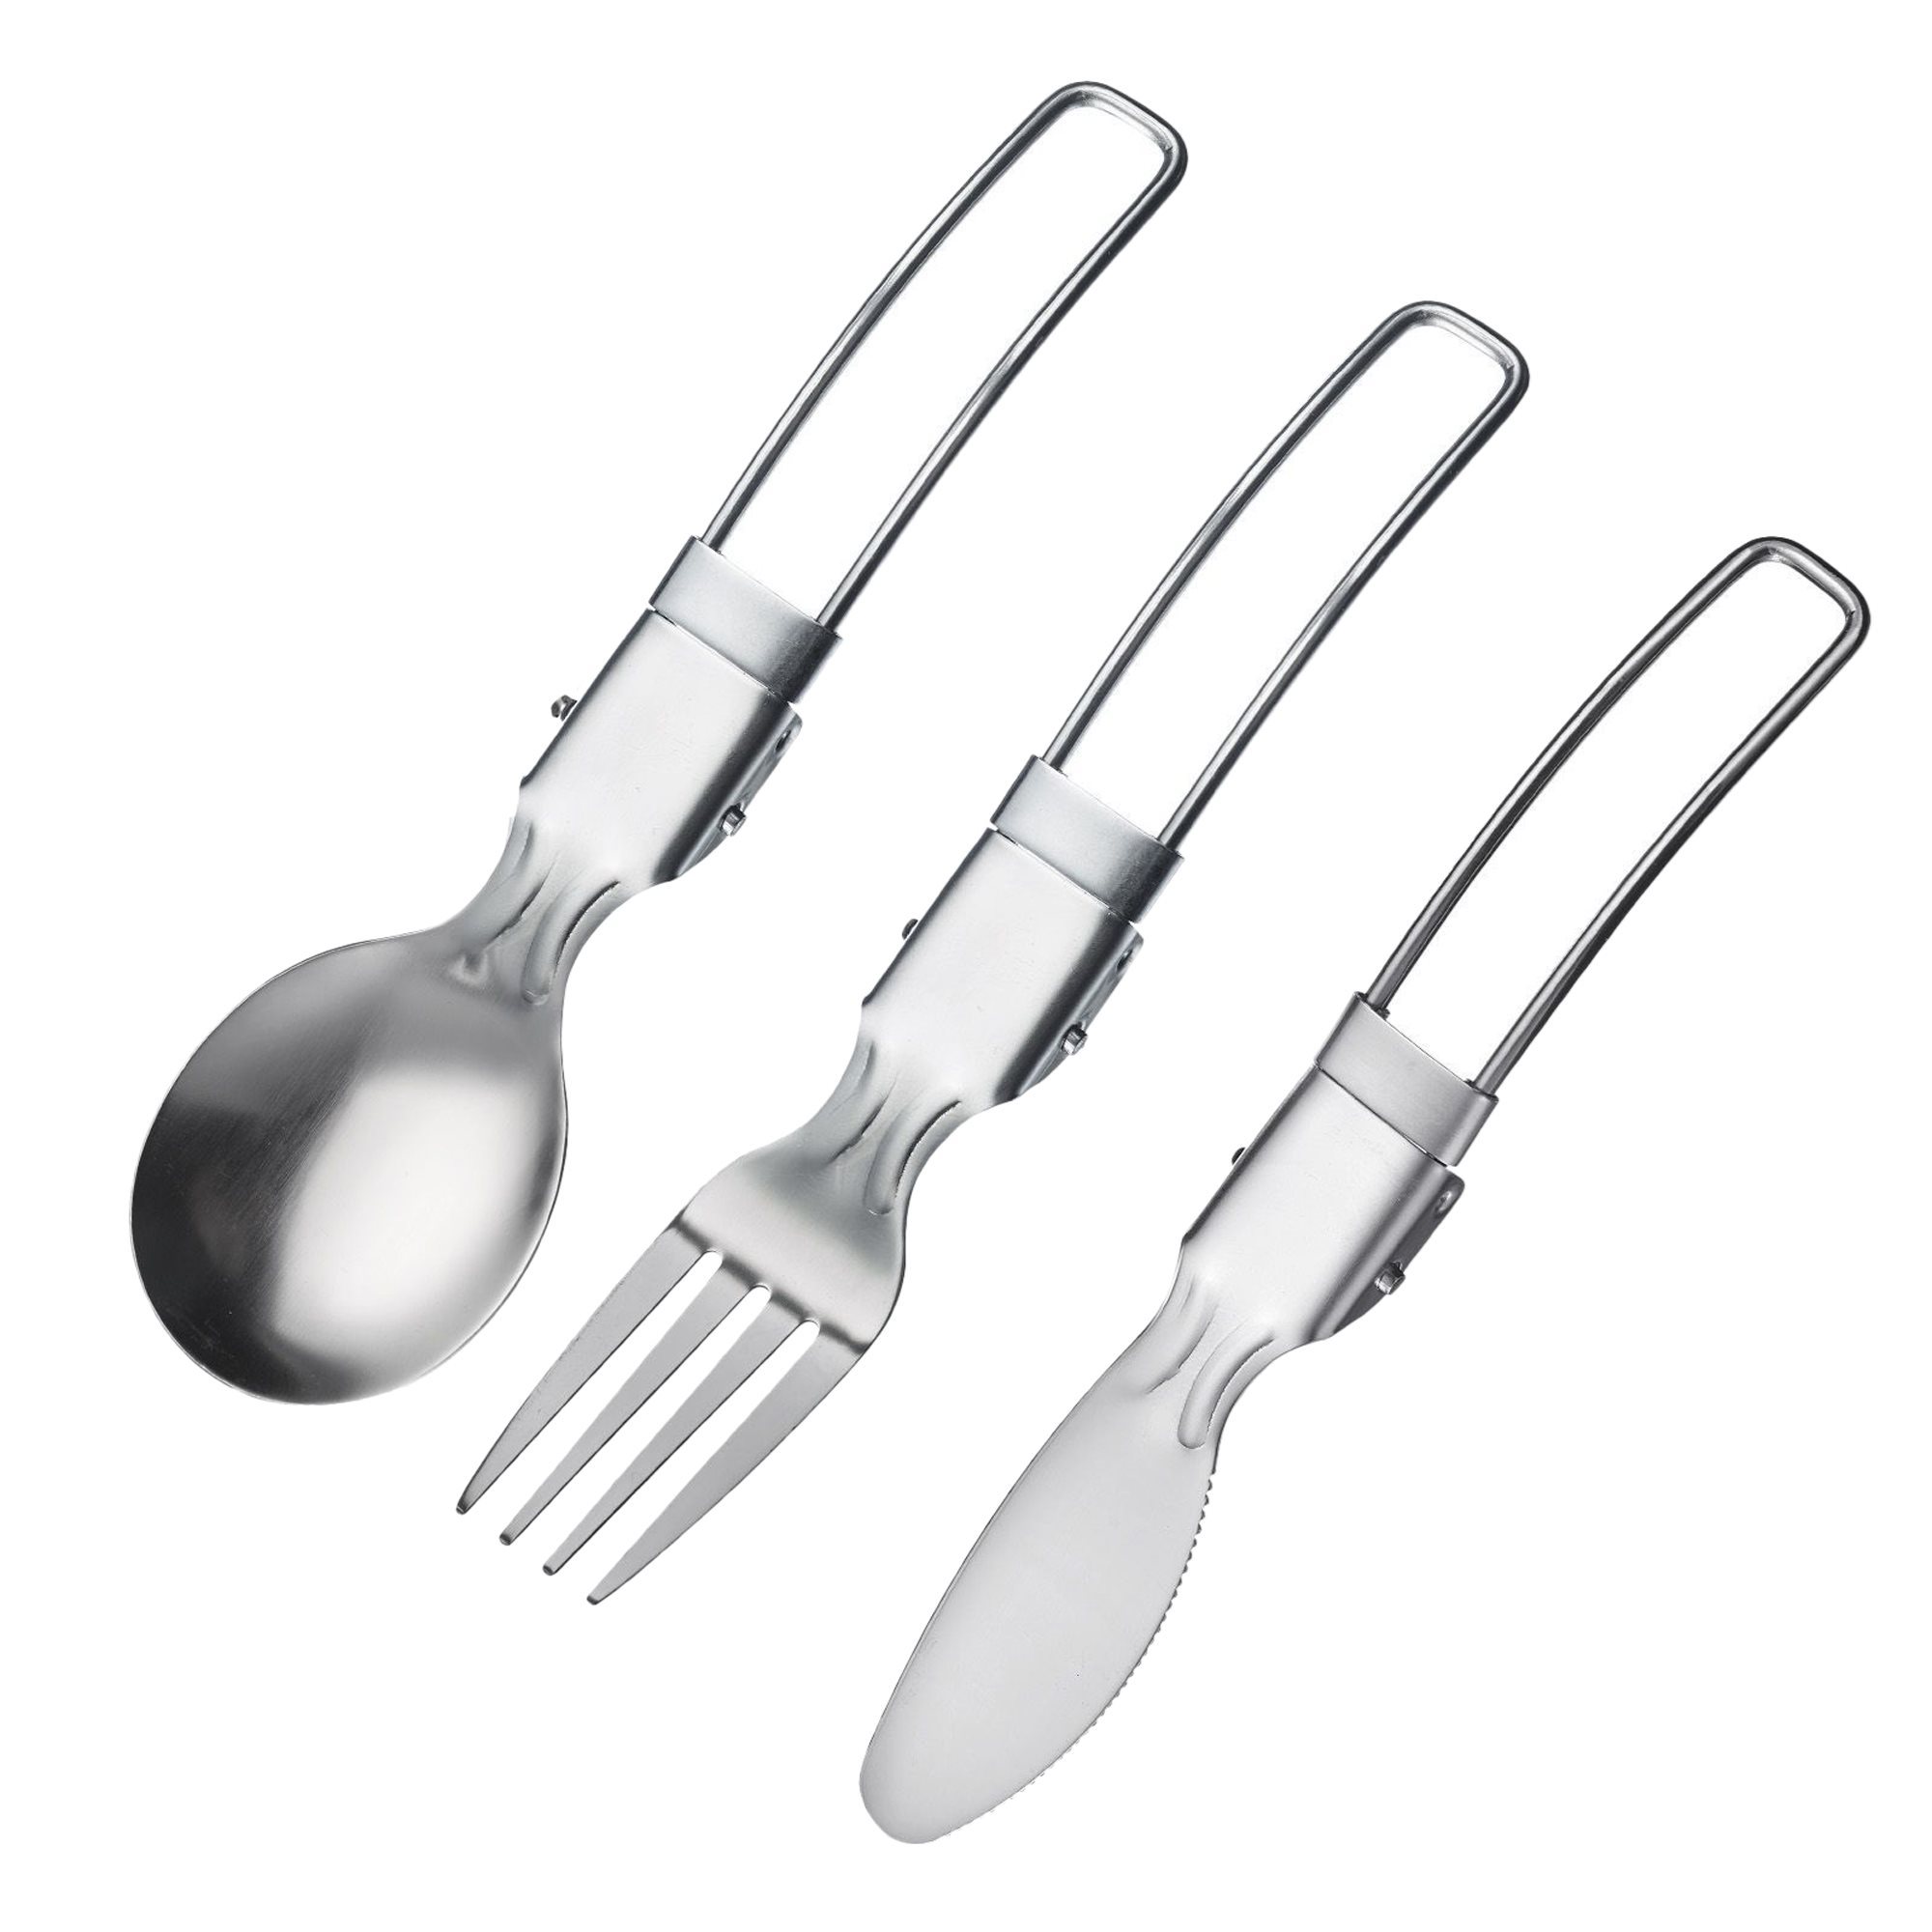 3pcs Outdoor Travel Stainless Steel Folding Cutlery Set With Knife, Fork,  Spoon